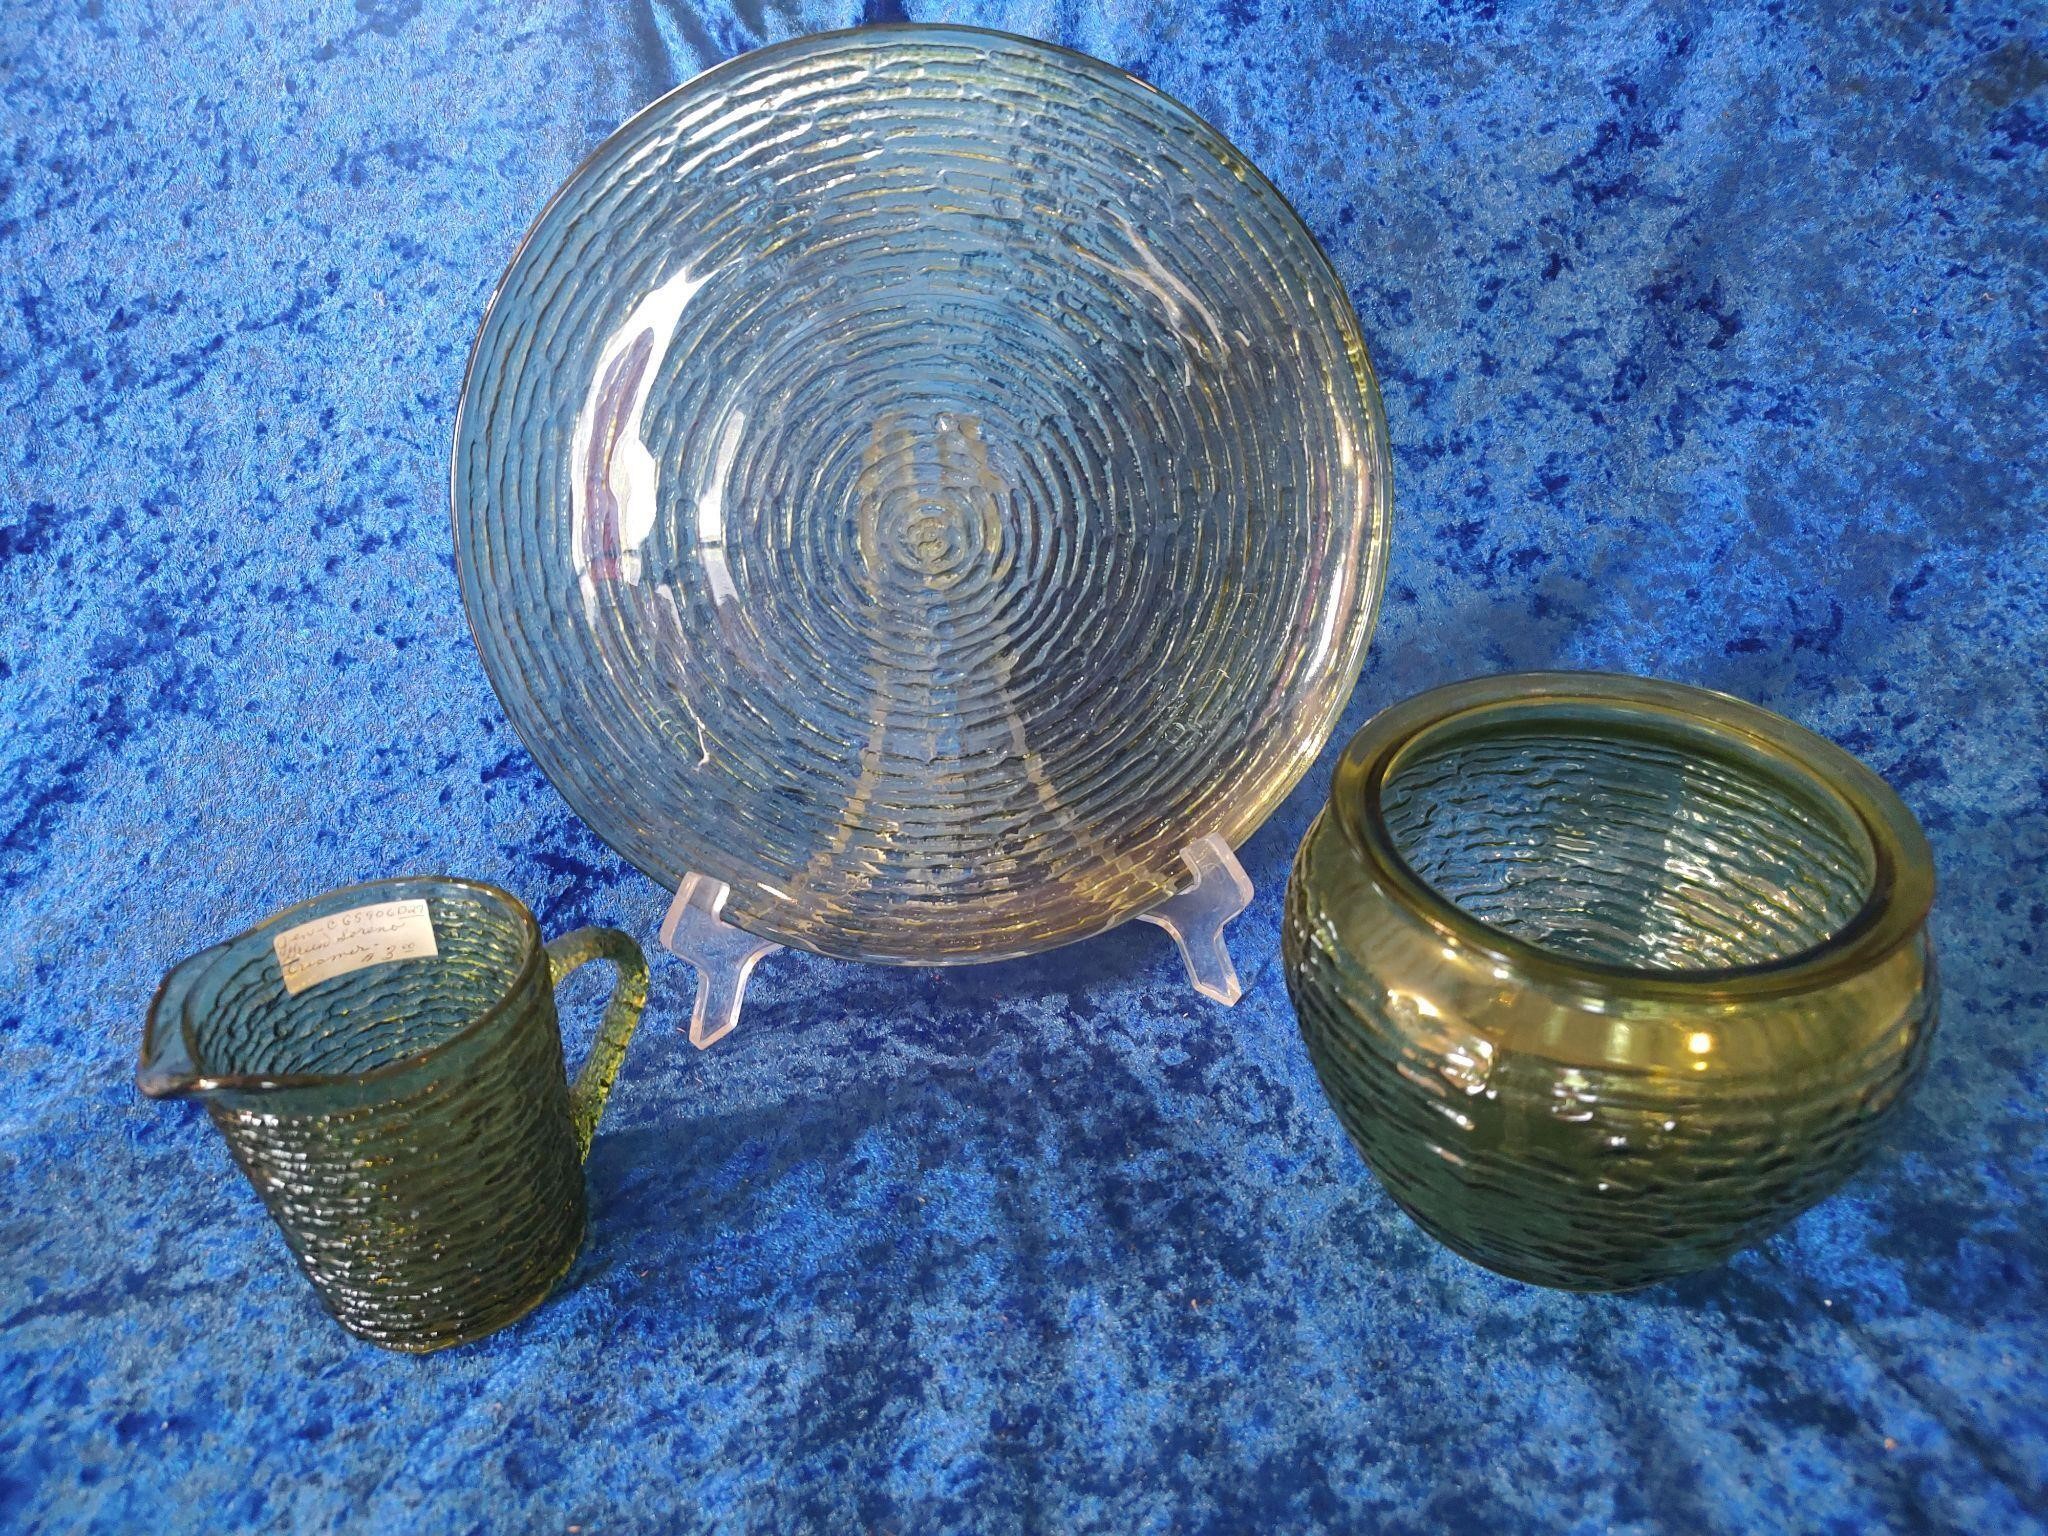 Ripple crinkle green glass pitcher plate bowl